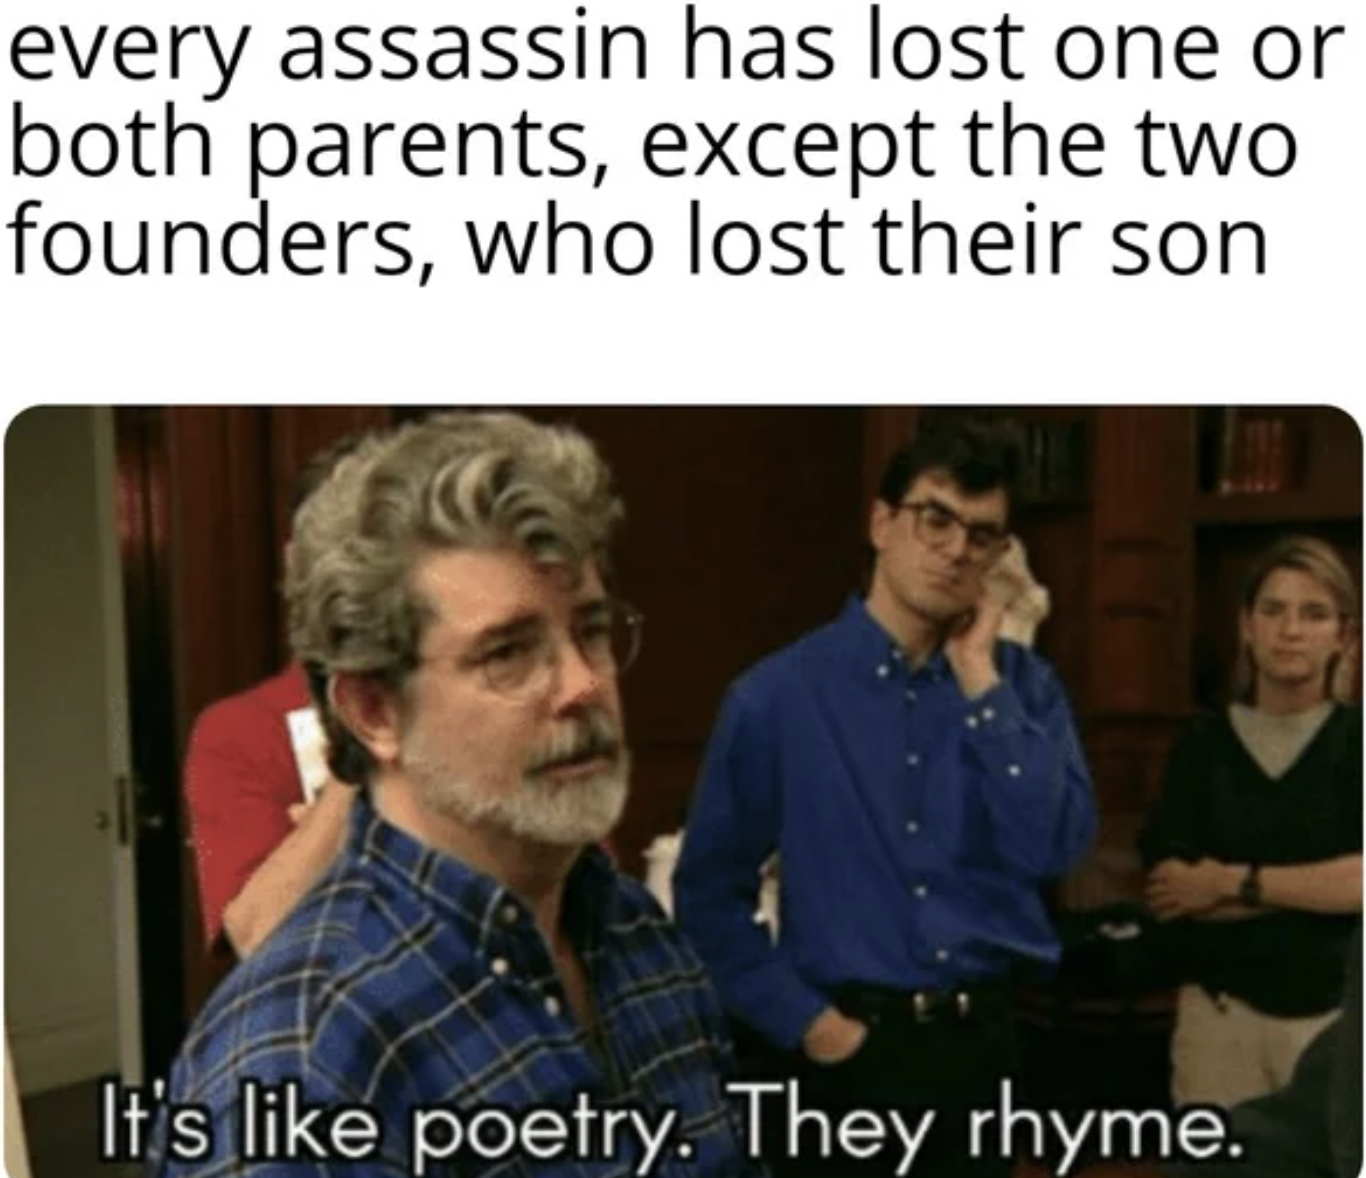 Assassin's Creed Memes - scripps networks interactive - every assassin has lost one or both parents, except the two founders, who lost their son It's poetry. They rhyme.